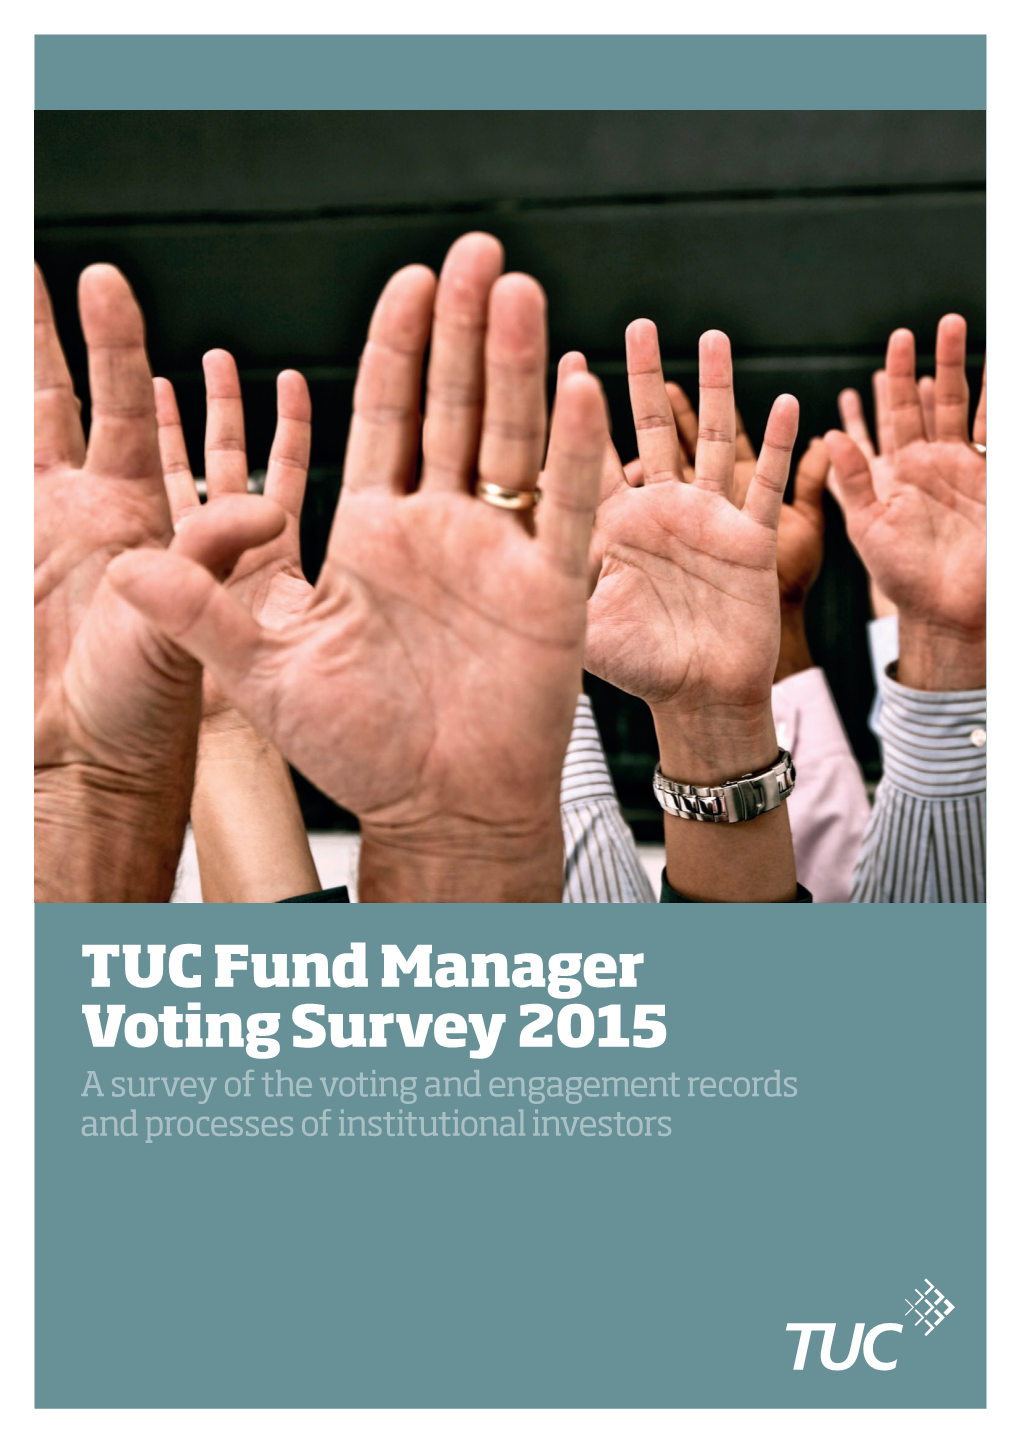 TUC Fund Manager Voting Survey 2015 a Survey of the Voting and Engagement Records and Processes of Institutional Investors